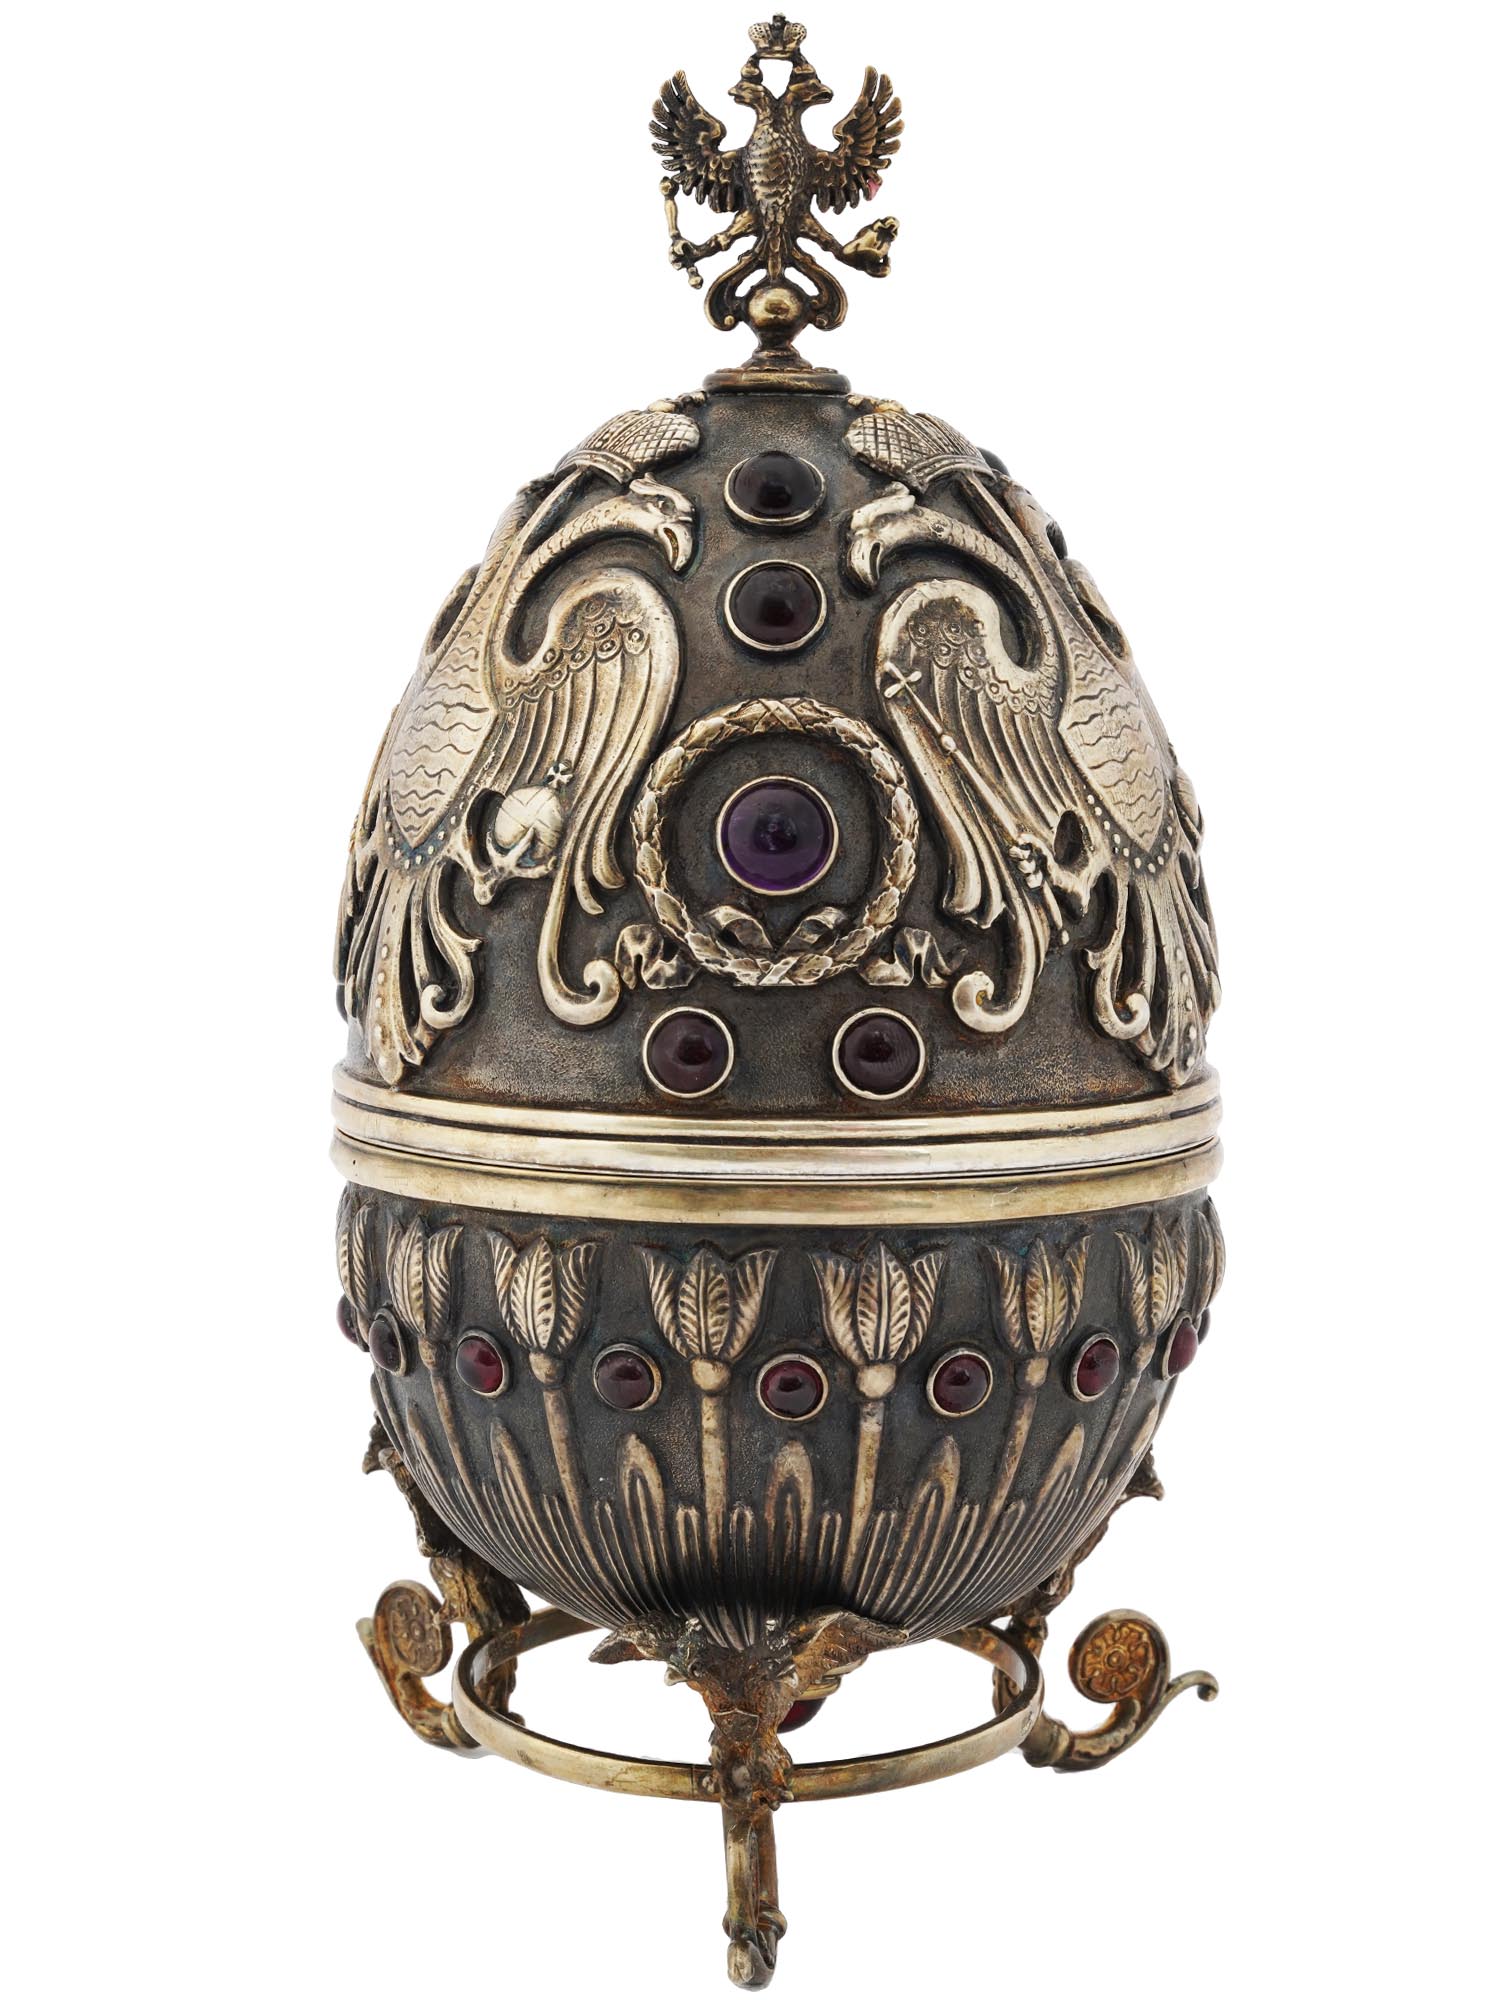 LARGE RUSSIAN GILT SILVER EGG CASKET ON STAND PIC-1